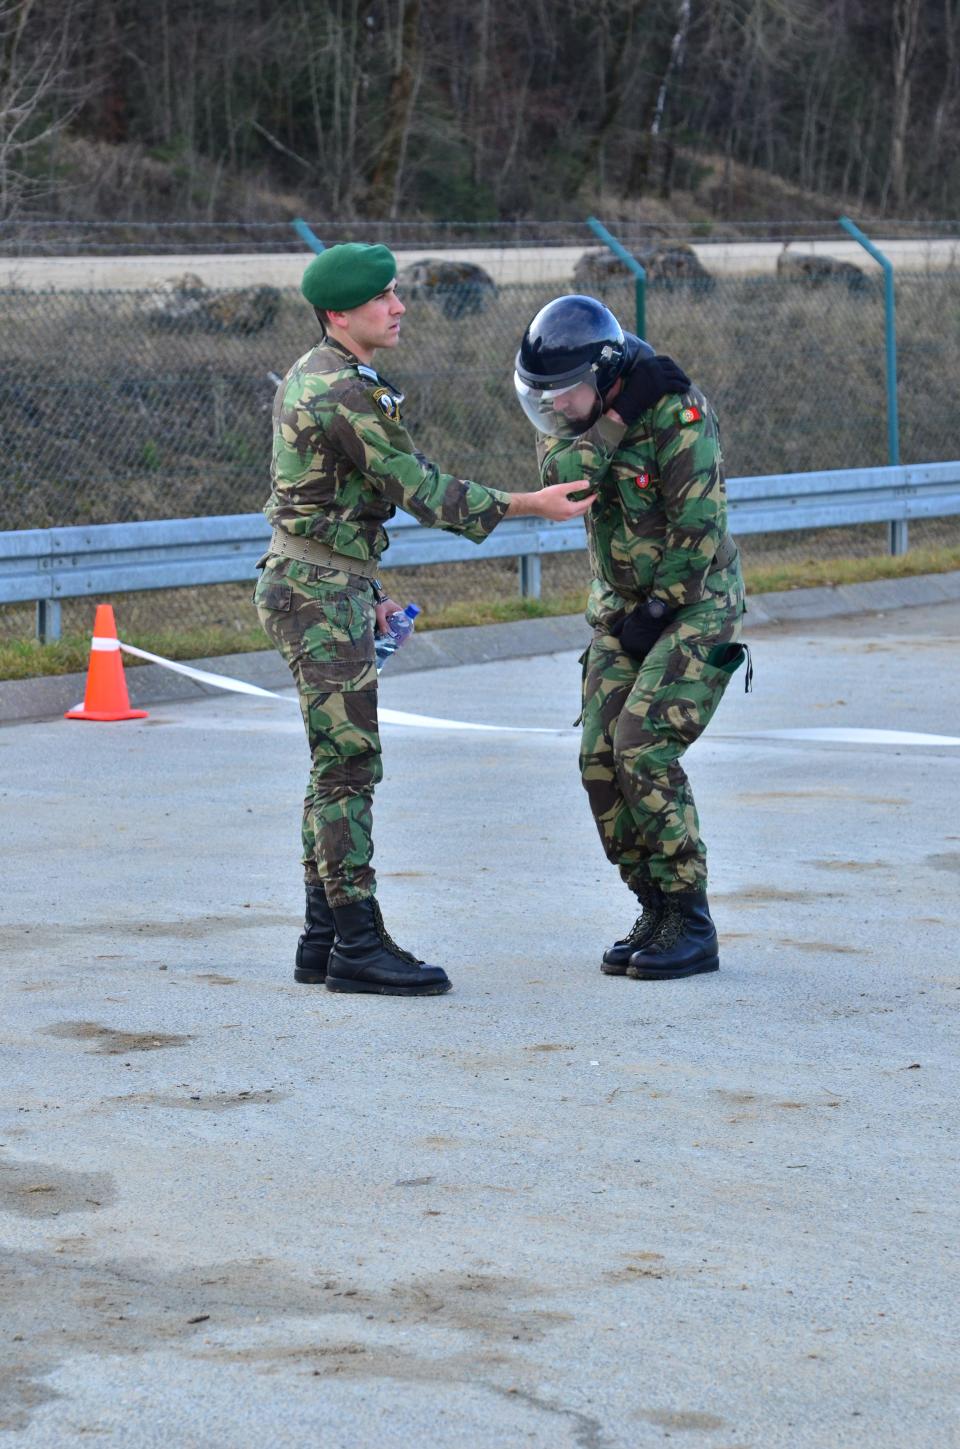 An image of two men in army fatigues demonstrating proper technique during a fire phobia training.